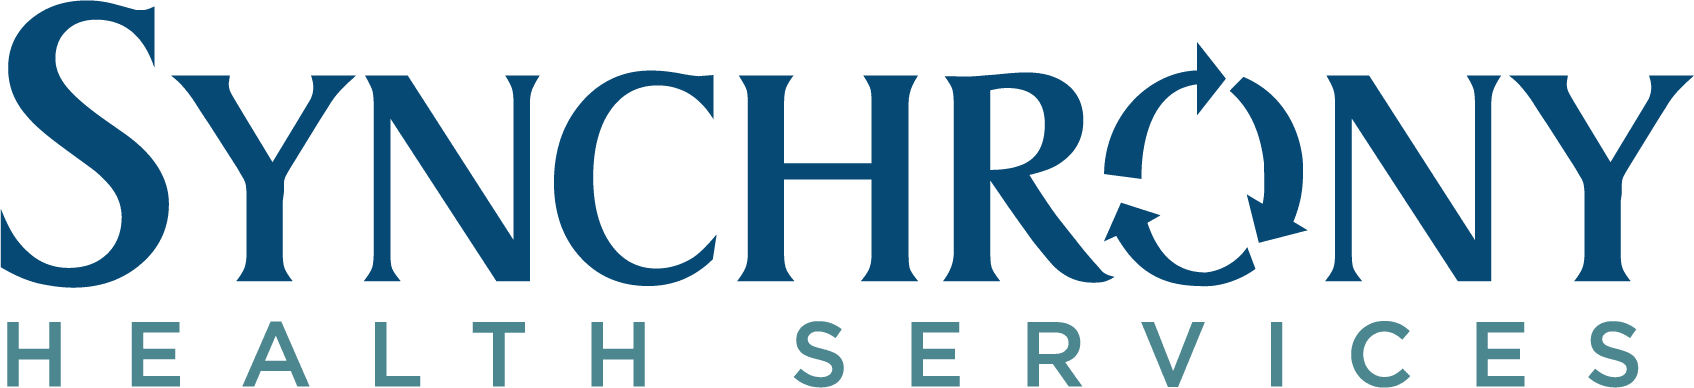 Synchrony Health Services from St. Charles Health Campus